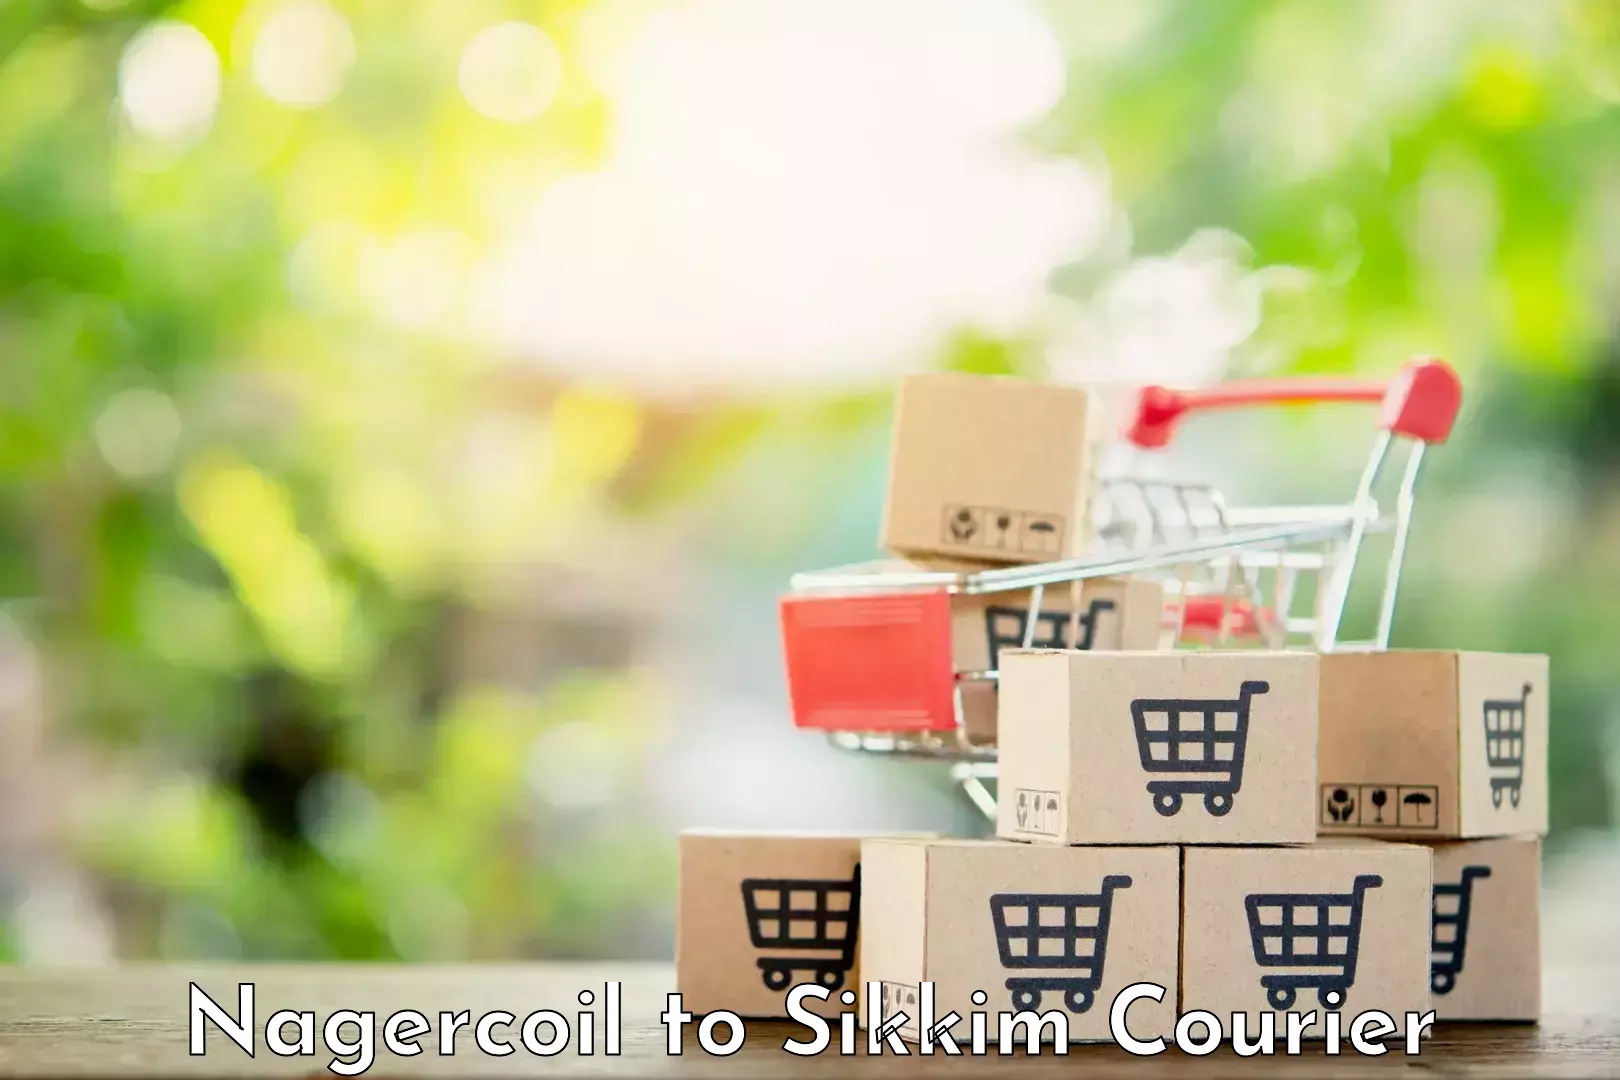 24-hour courier service Nagercoil to Sikkim